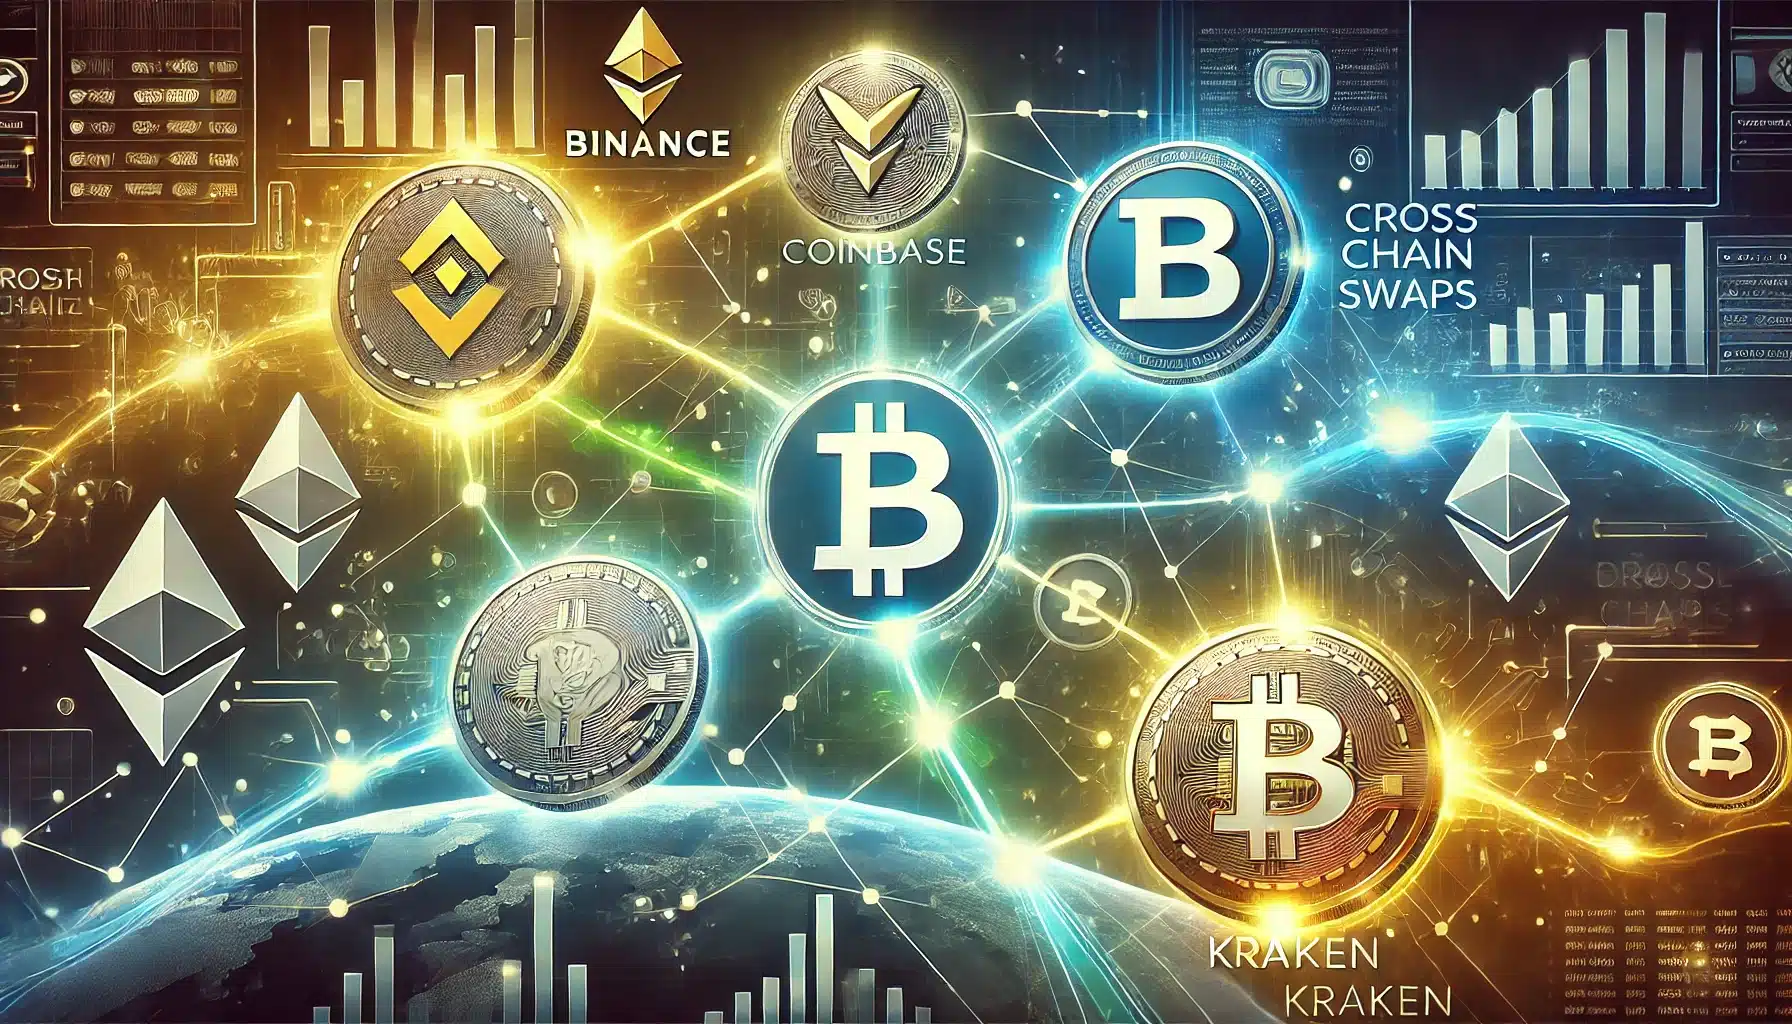 Digital illustration featuring logos of top cryptocurrency exchanges like Binance, Coinbase, and Kraken connected by glowing pathways, symbolizing cross-chain swaps. The background has a futuristic, high-tech look with blockchain graphics and digital currency icons.